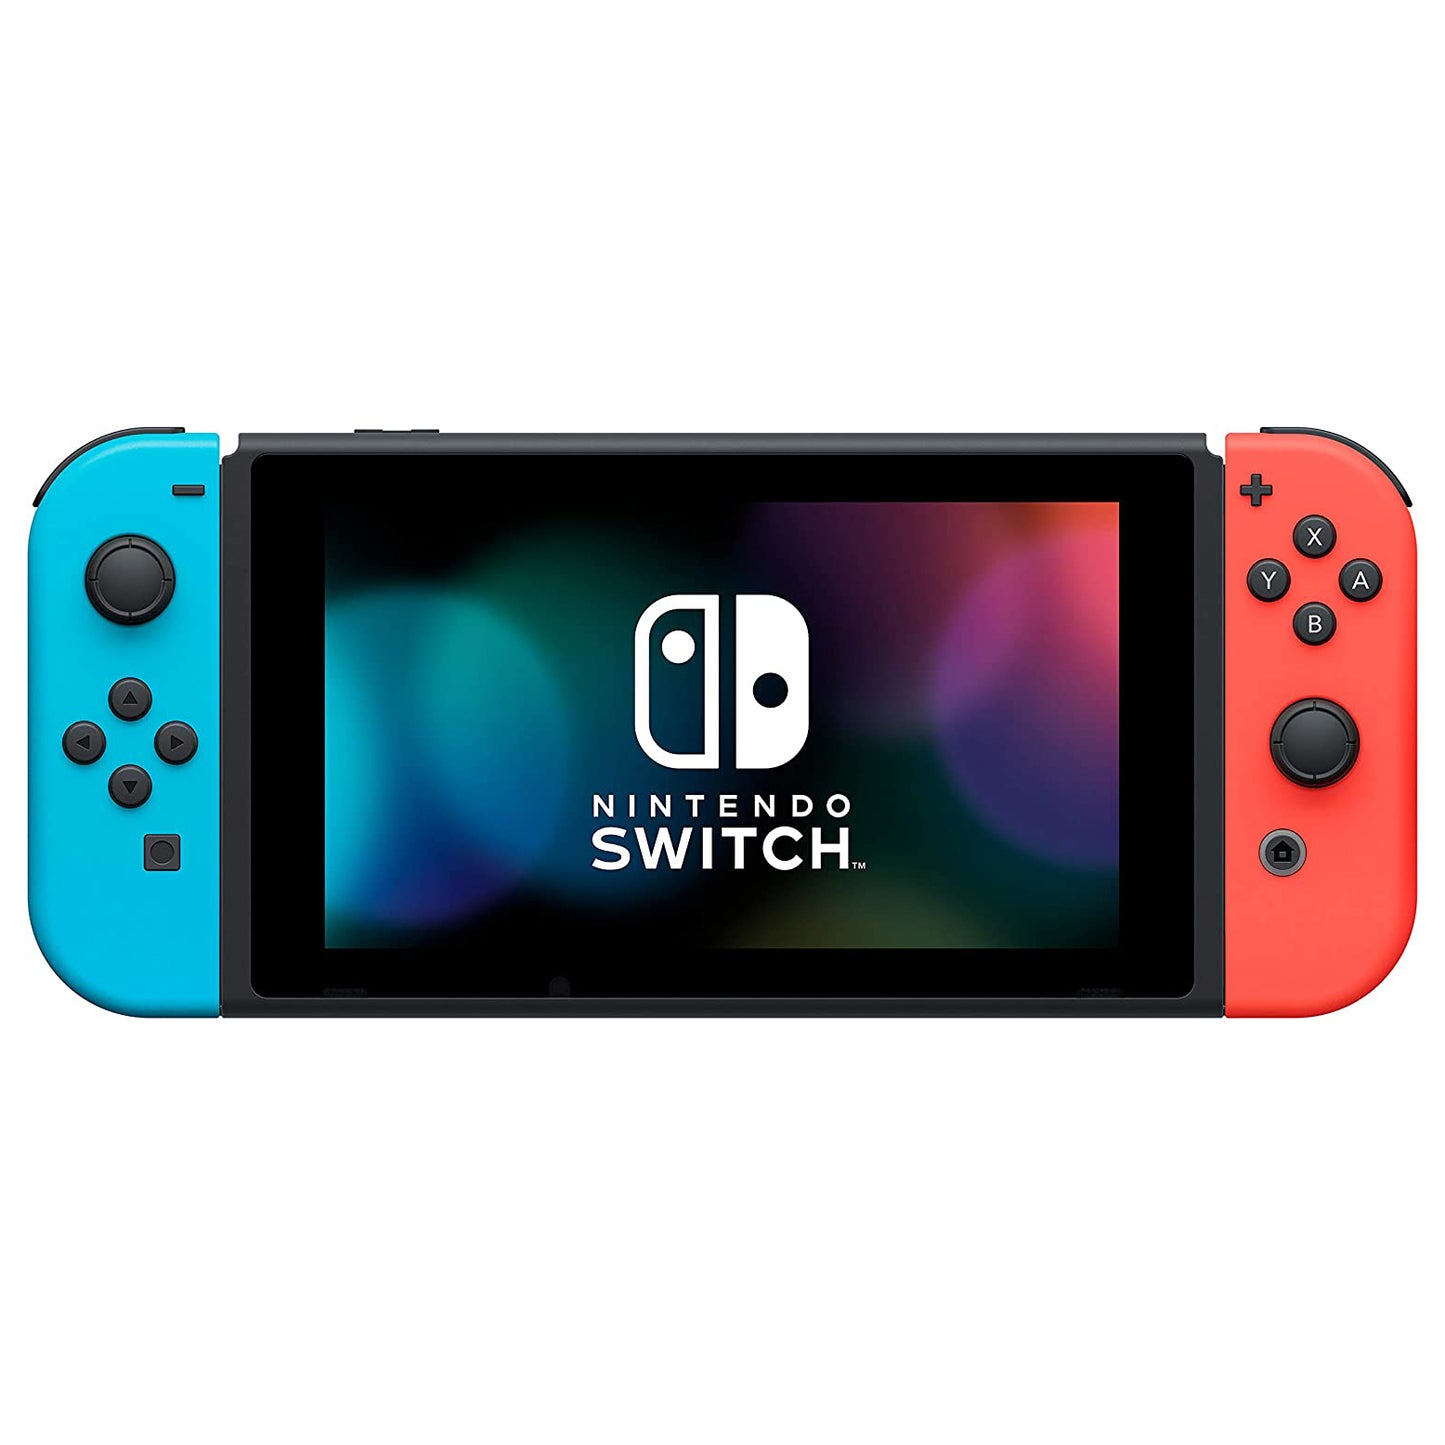 Nintendo Switch - 32GB Gray Console (with Neon Red/Neon Blue Joy-Con)